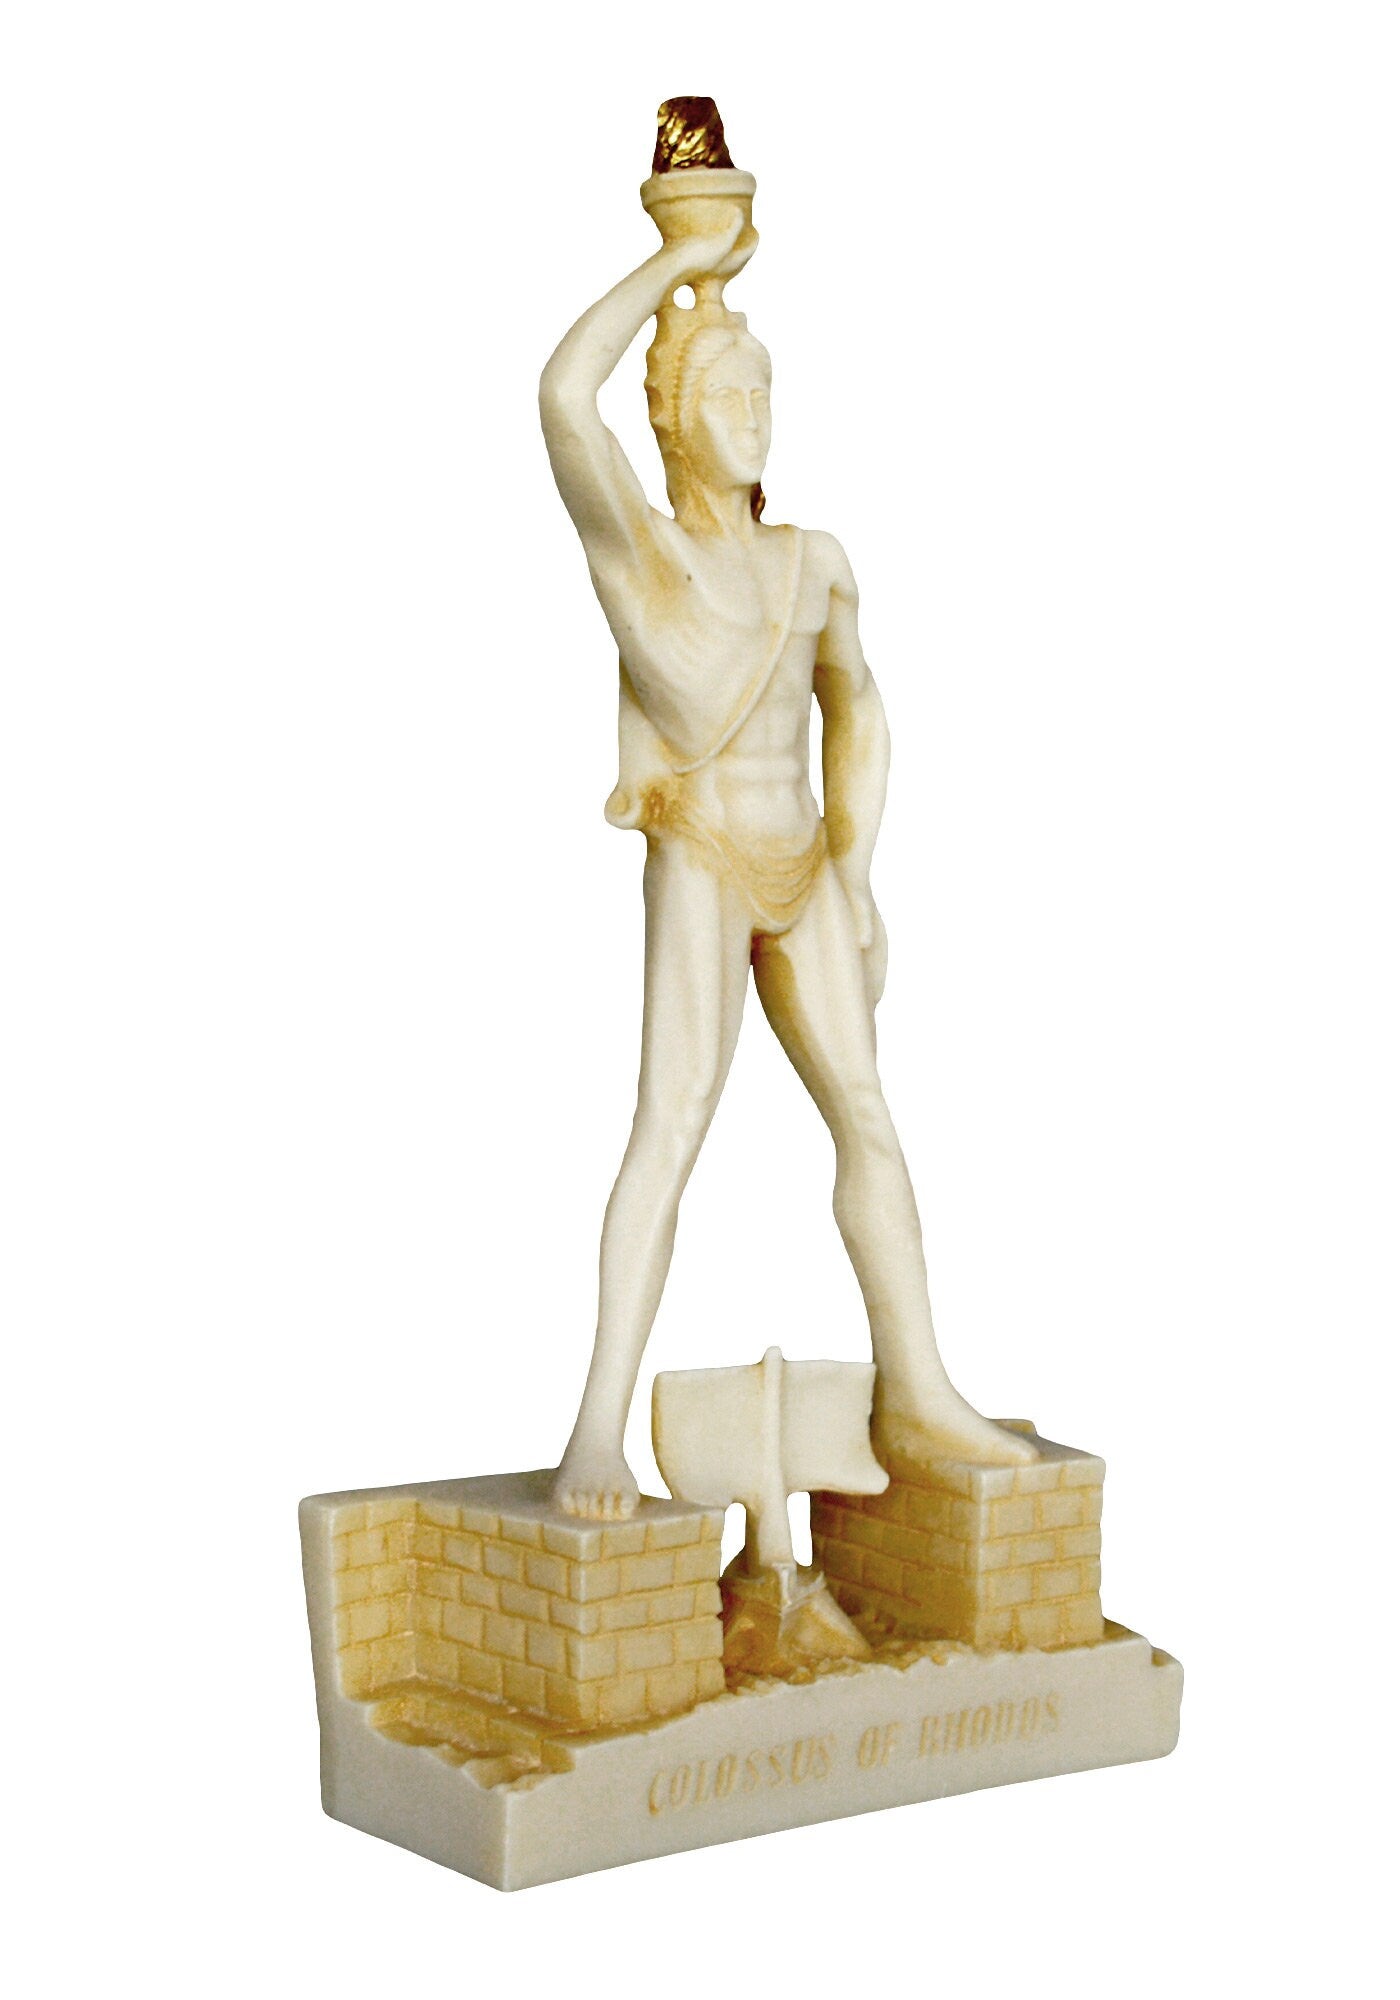 Colossus of Rhodes - Sun God Helios - 280-226 BC - One of the Seven Wonders of the Ancient World - Aged Alabaster Statue